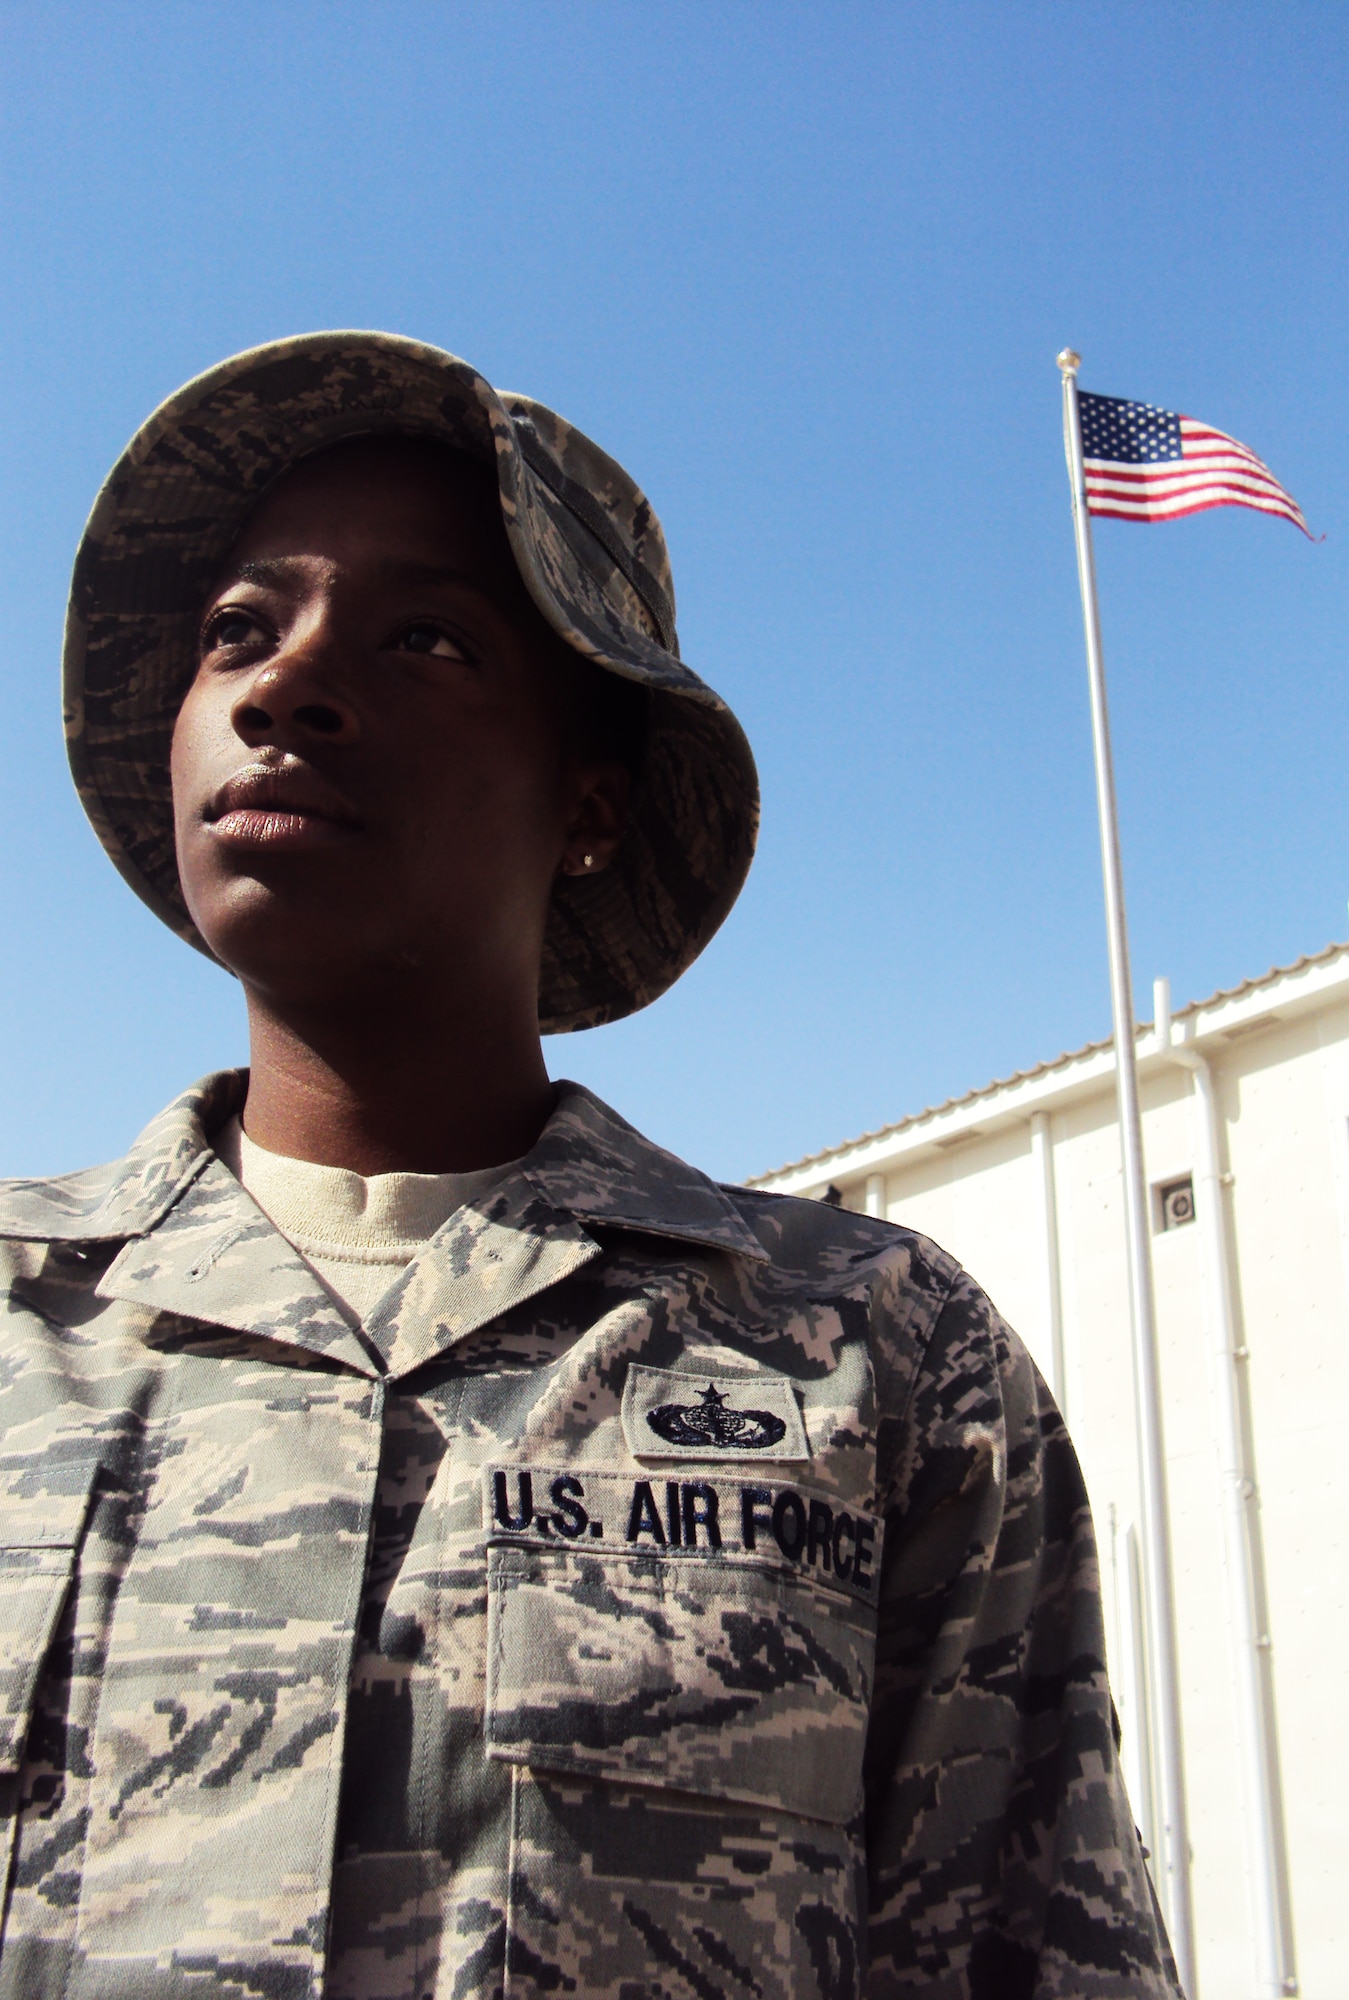 Staff Sgt. Sparkle Reid, a services journeyman, is deployed as the non-appropriated funds custodian for the 380th Expeditionary Force Support Squadron at a non-disclosed base in Southwest Asia.  Here she is pictured by the American flag by the 380th Air Expeditionary Wing headquarters on Feb. 25, 2010. Sergeant Reed lost her uncle, Louie A. Williams, when the World Trade Center towers came down on Sept. 11, 2001. He worked on the 66th floor of the North Tower for the New York Port Authority as a paralegal. On Feb. 27, 2009, Sergeant Reid lost her father, Charles T. Reid, after complications from surgery. She credits both her uncle and her father as her inspiration for serving. Sergeant Reid is deployed from from the 48th Force Support Squadron at RAF Lakenheath, England, and her hometown is Queens, N.Y. (U.S. Air Force Photo/Master Sgt. Scott T. Sturkol/Released)